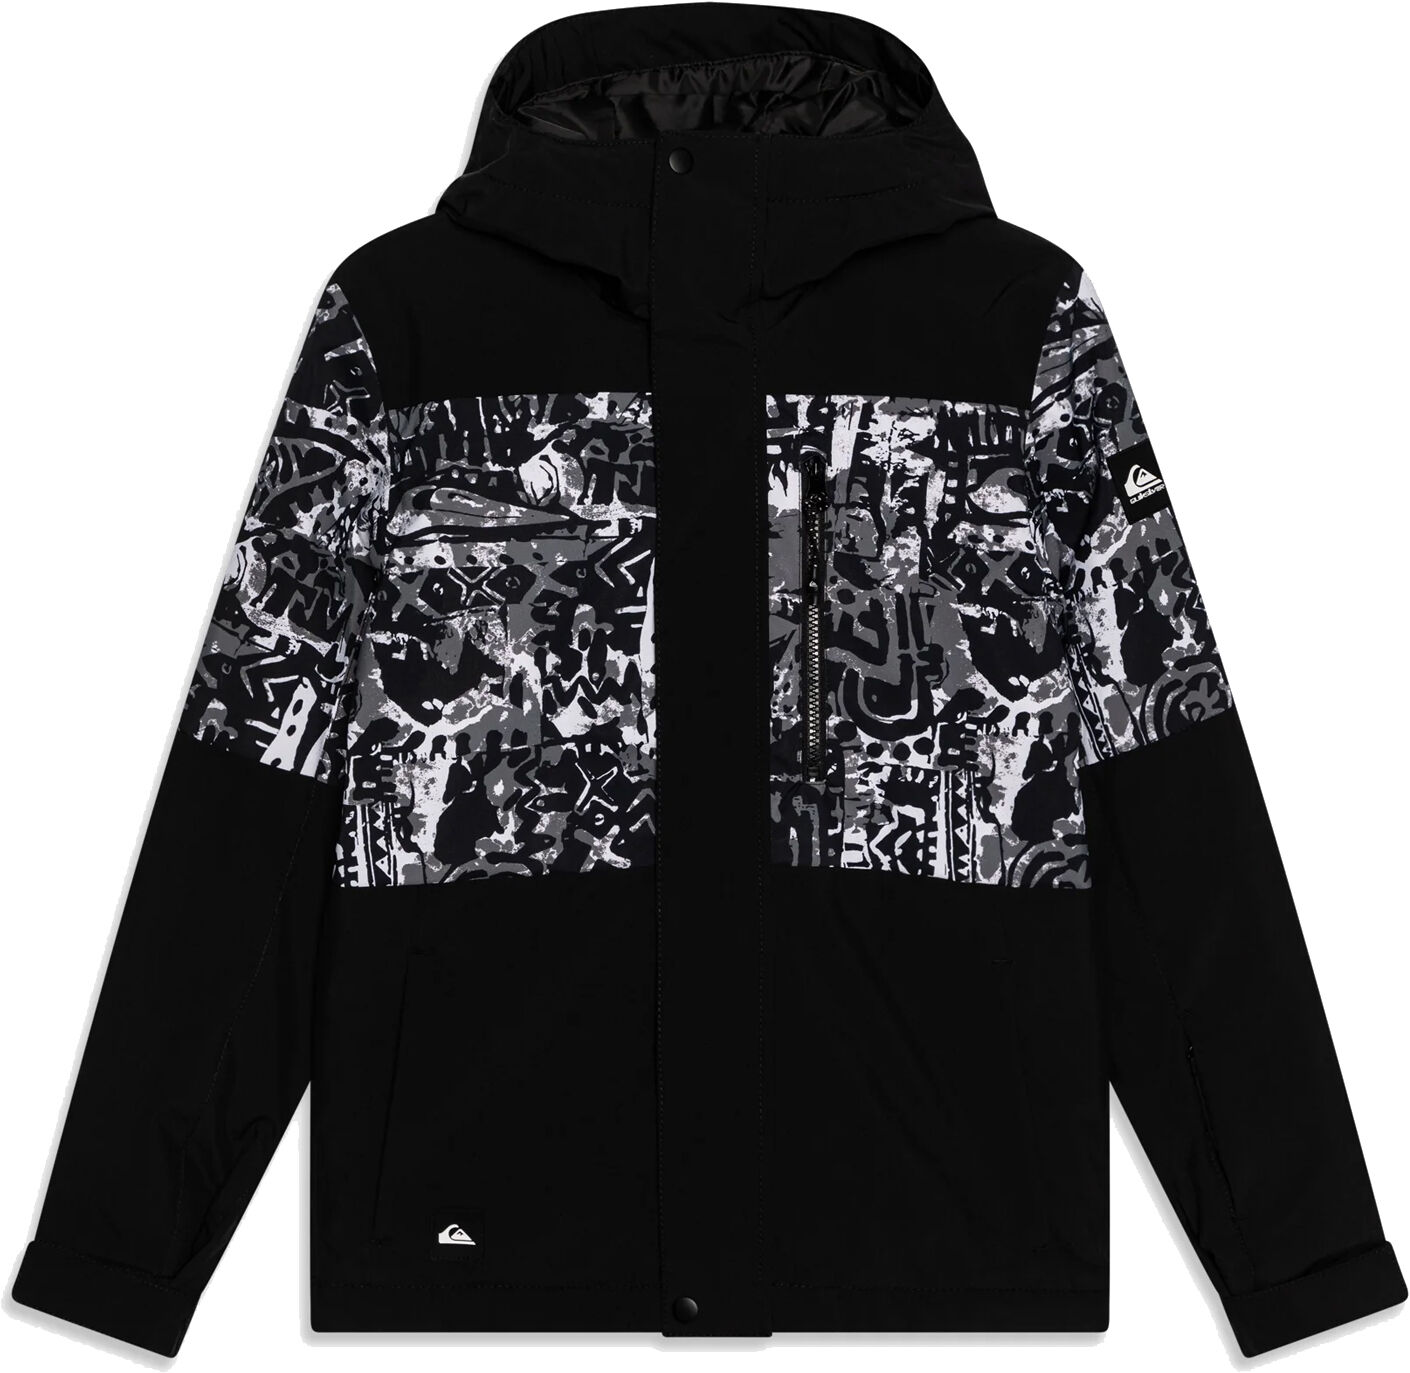 Quiksilver MISSION PRINTED BLOCK YOUTH SNOW HERITAGE XS